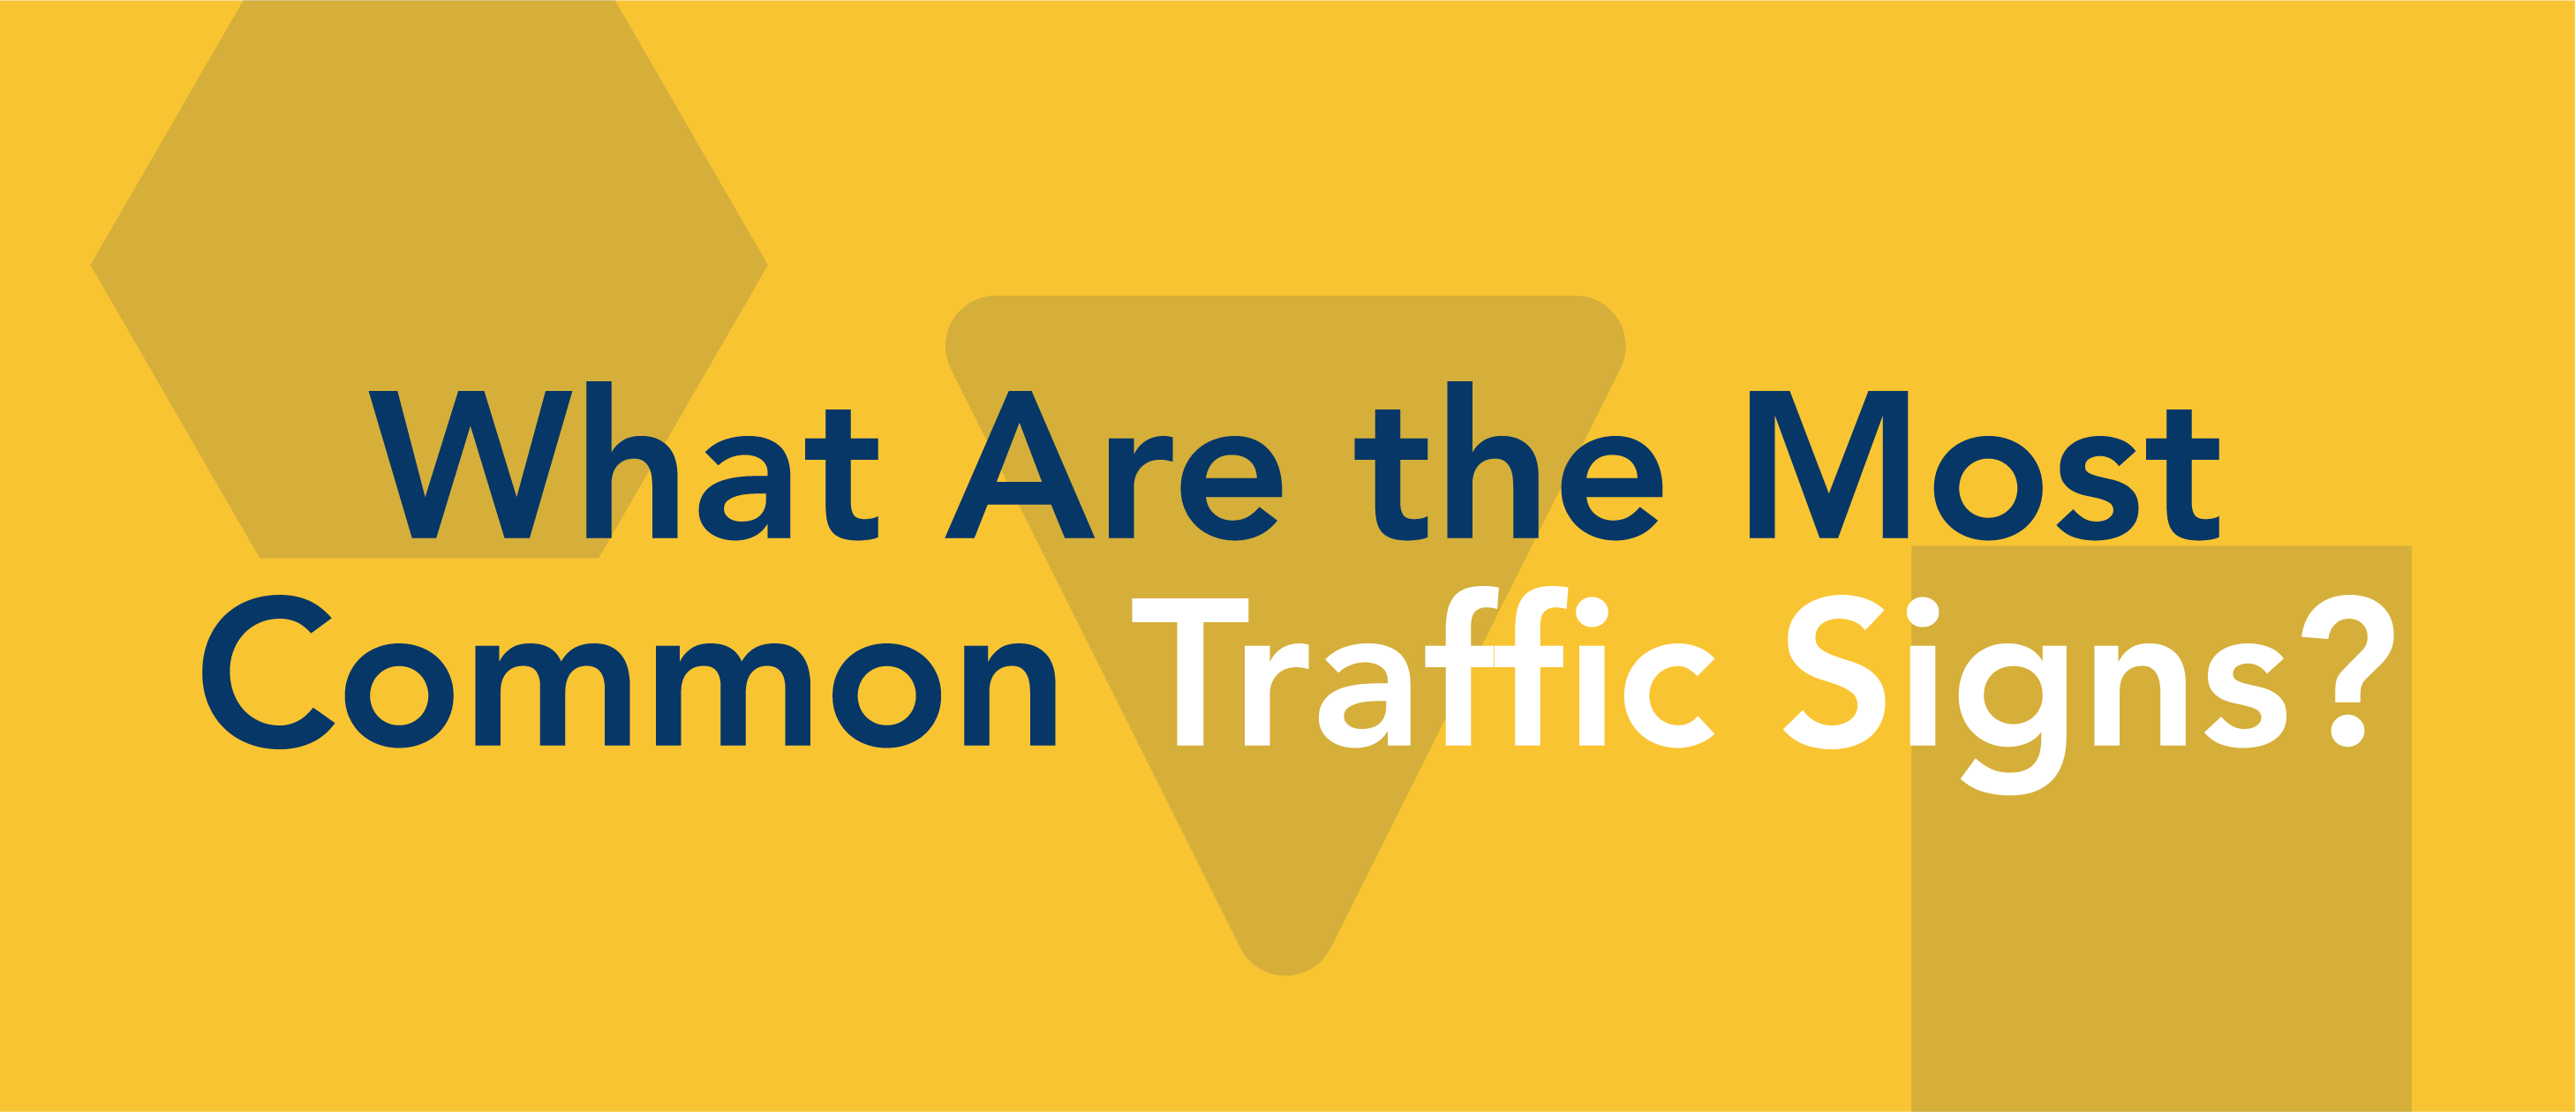 most common traffic signs